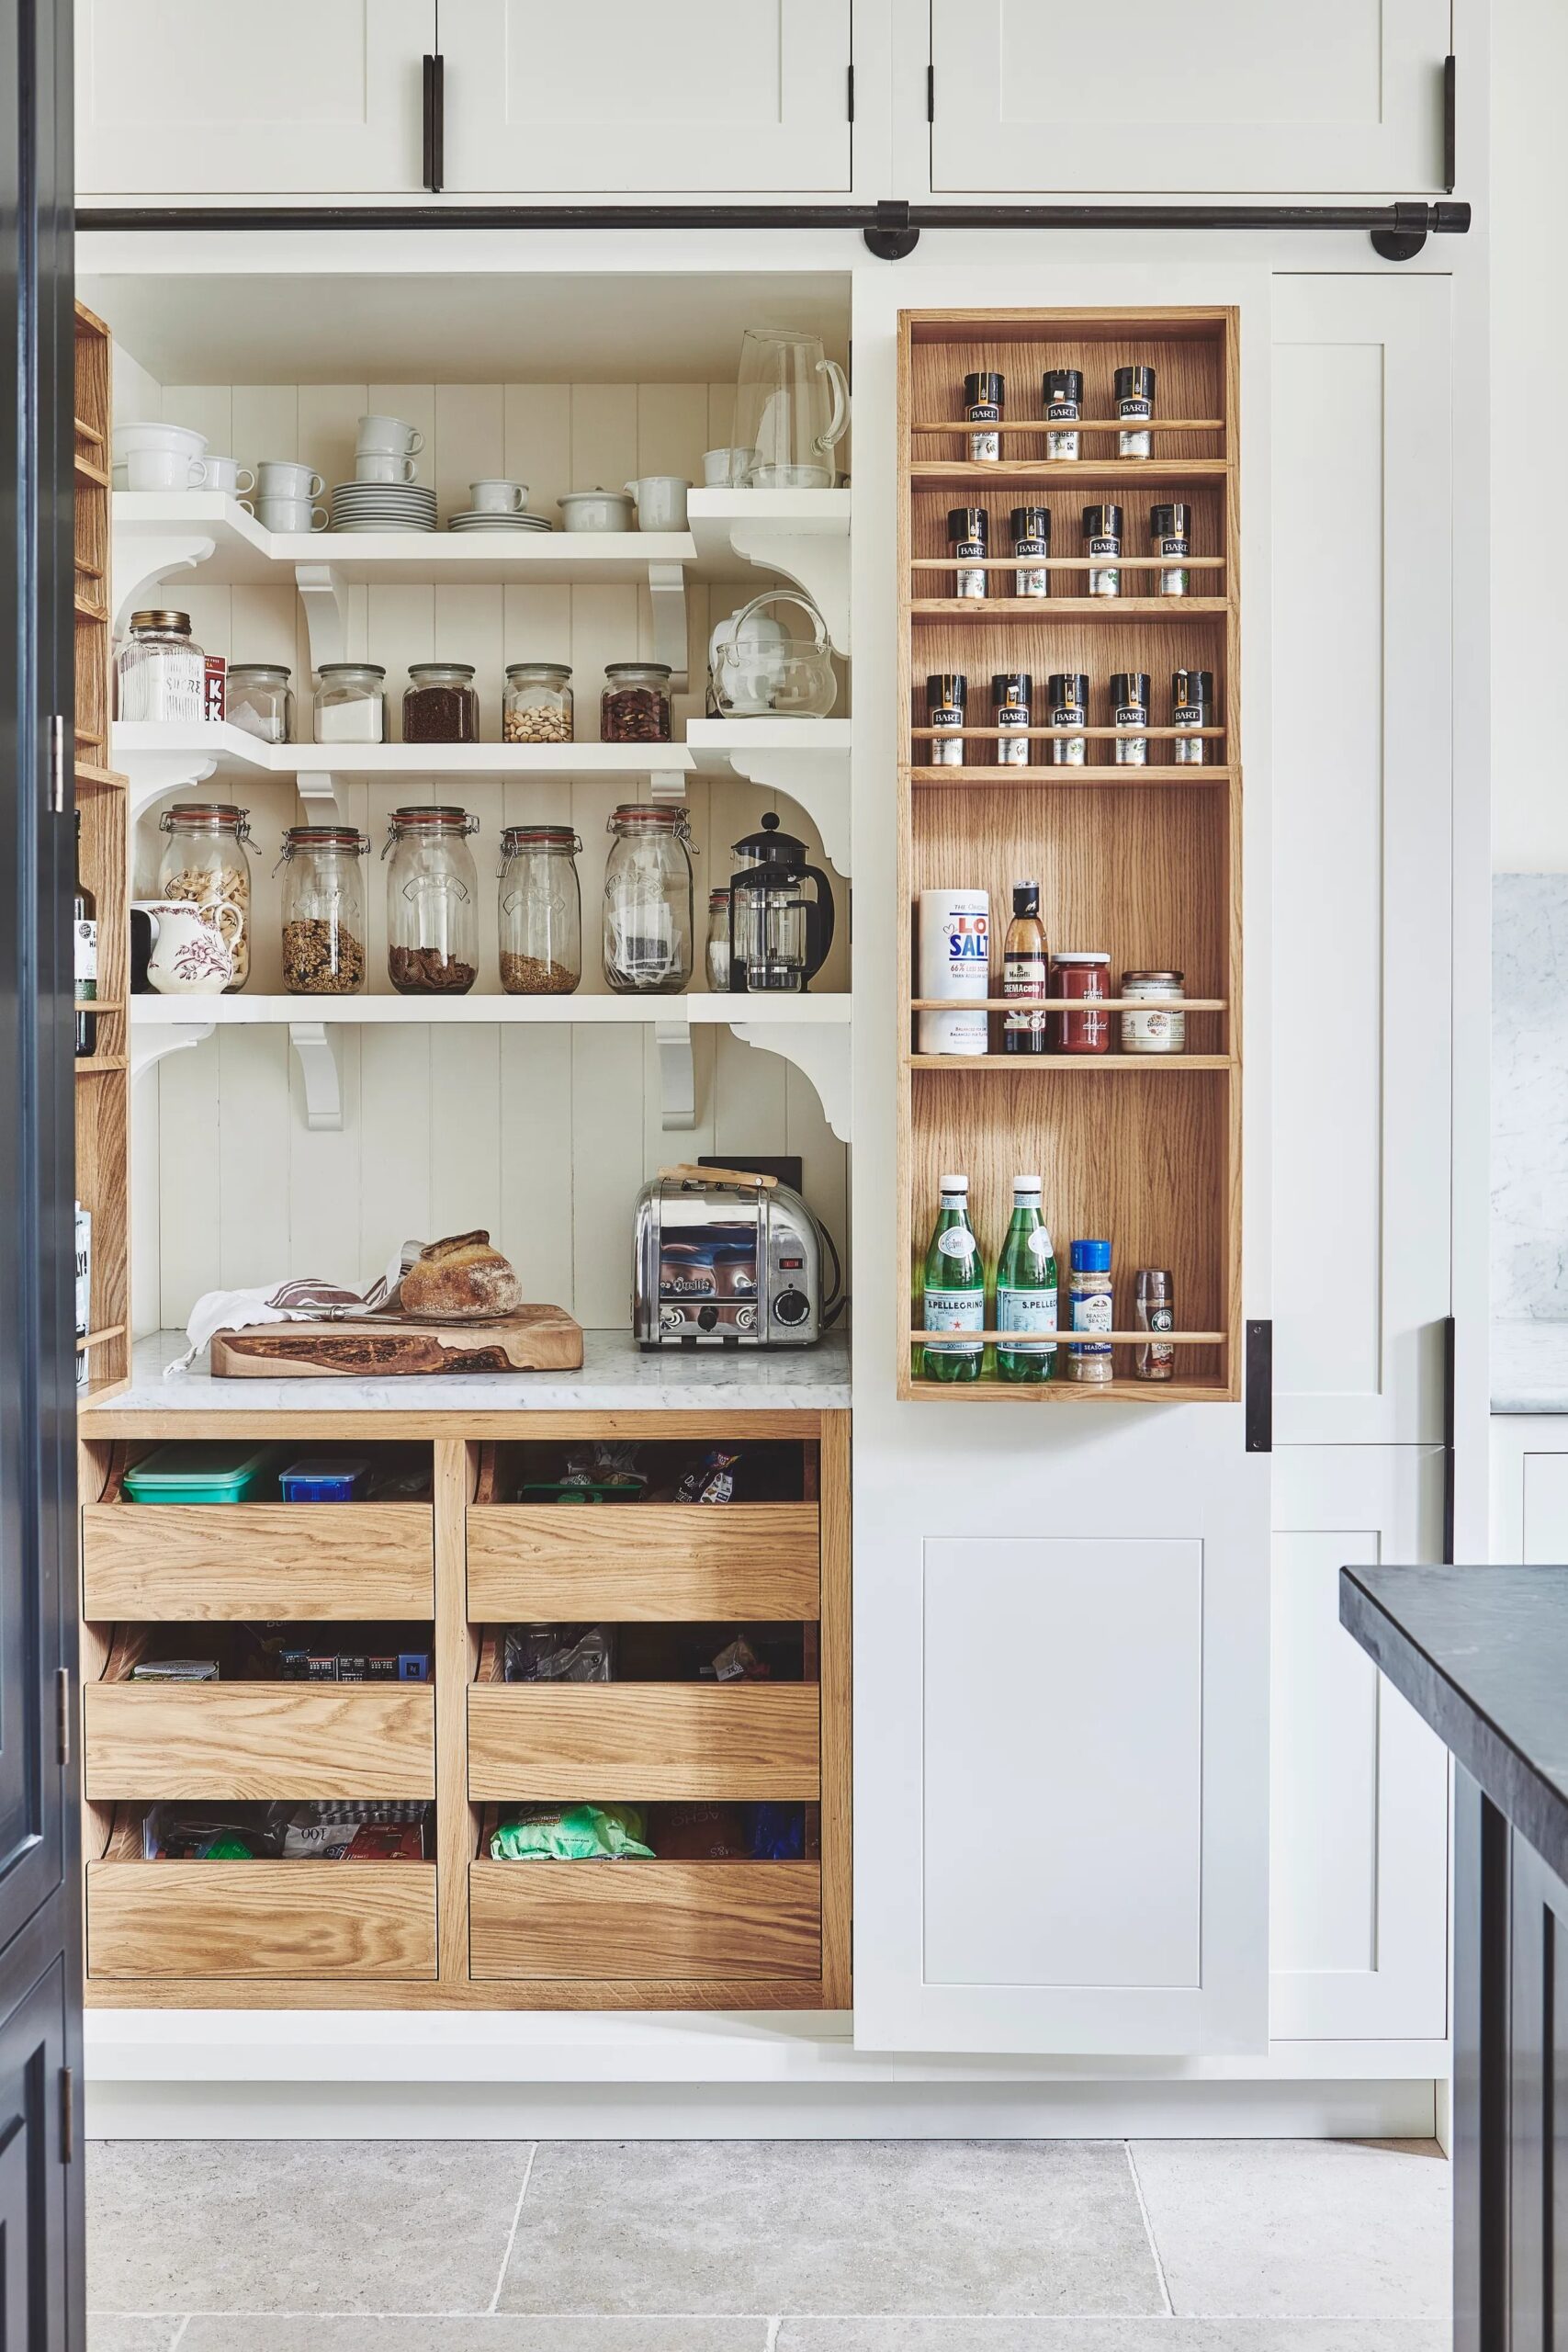 Practical Kitchen Cupboard : Organize Your Kitchen Cupboard Like a Pro with These Practical Tips